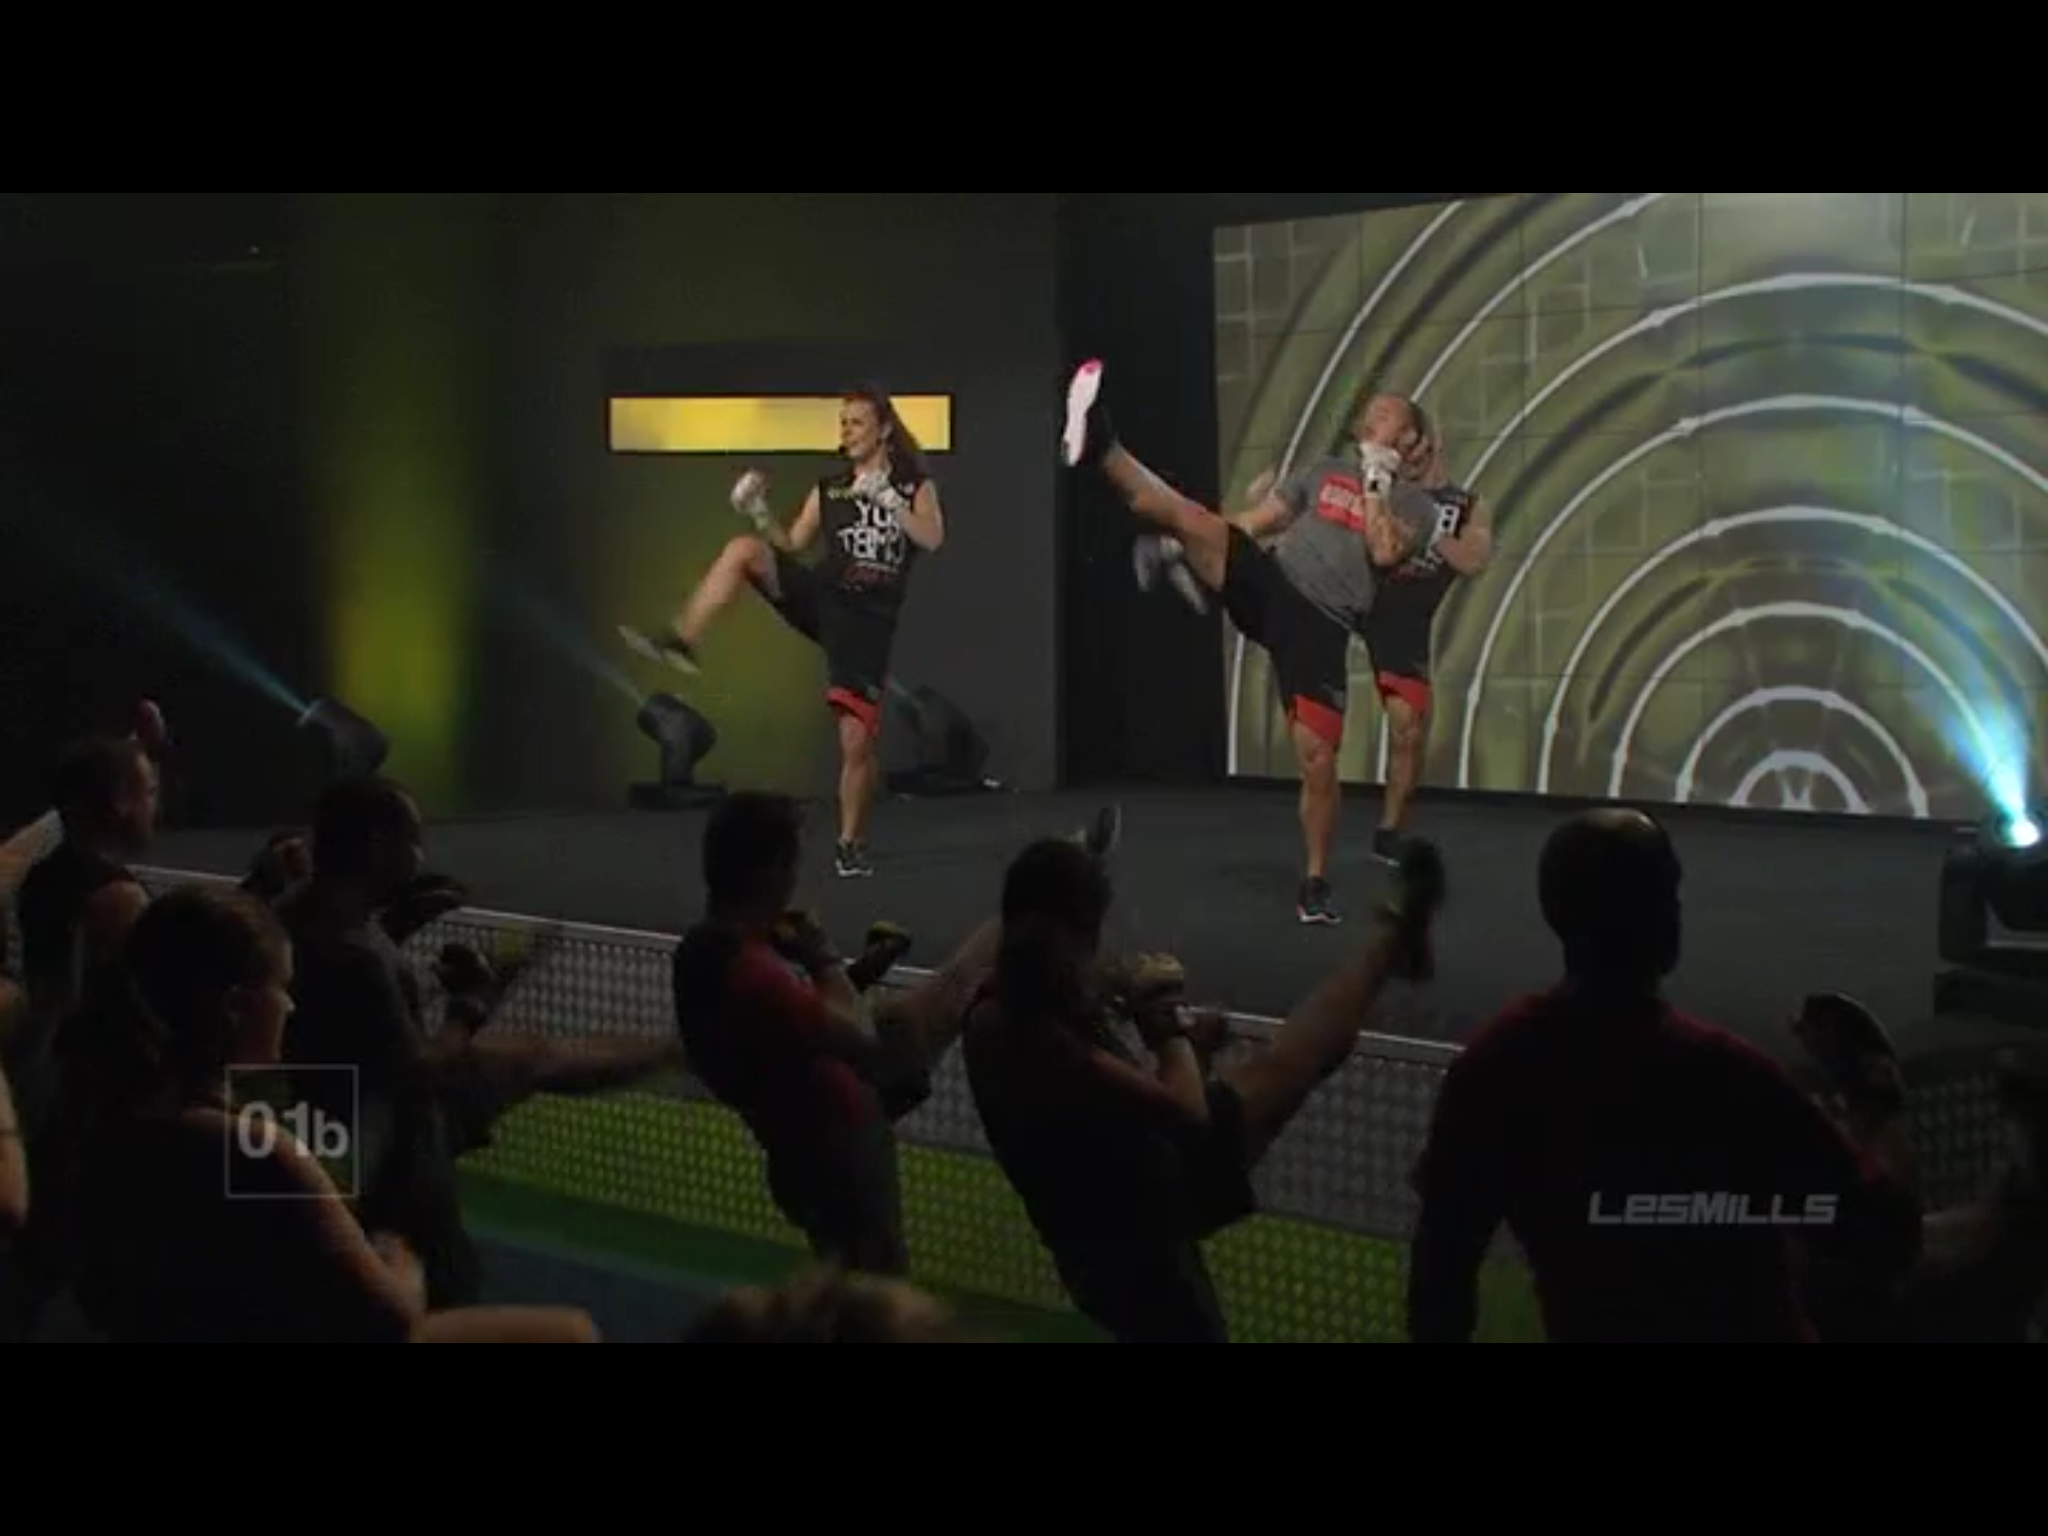 Review of Les Mills Body Combat release 61